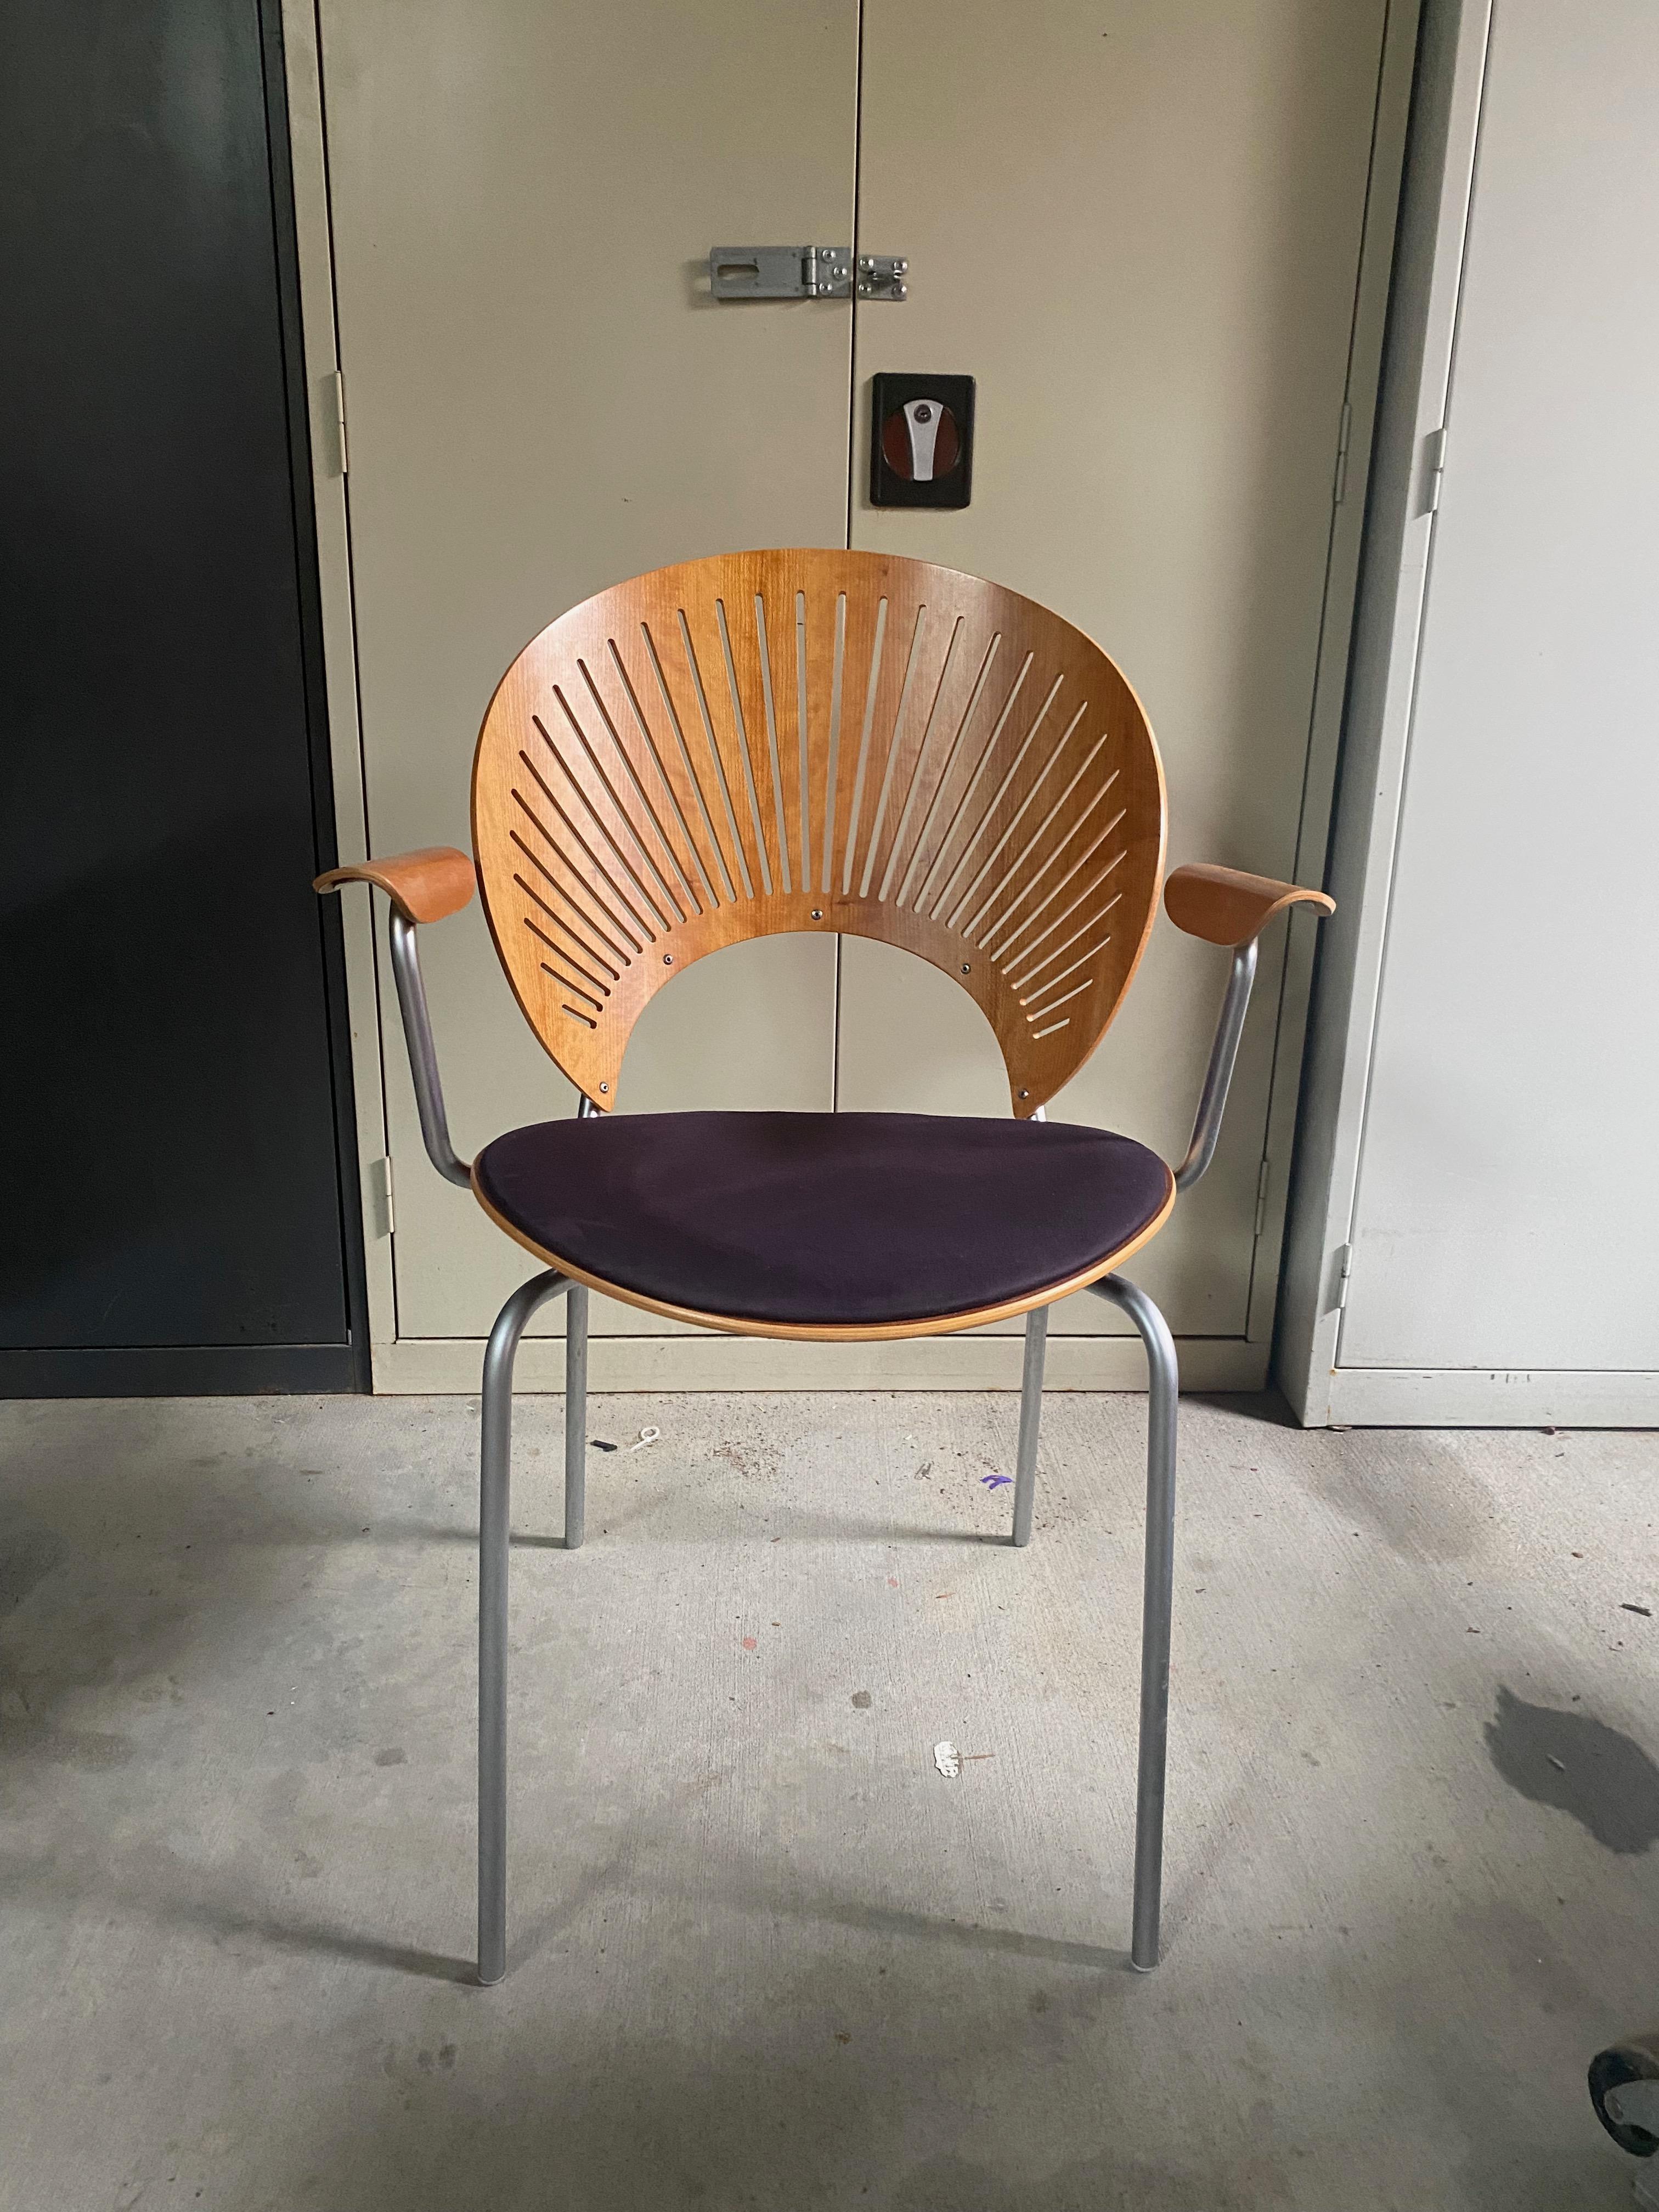 Very rare Trinidad teak dining chairs with arms by Nanna Ditzel for Fredericia Stolefabrik Denmark, circa 1995.  The seat cushions in Aubergine Ultrasuede are in good condition and are easily reupholstered in your choice of fabric or leather upon